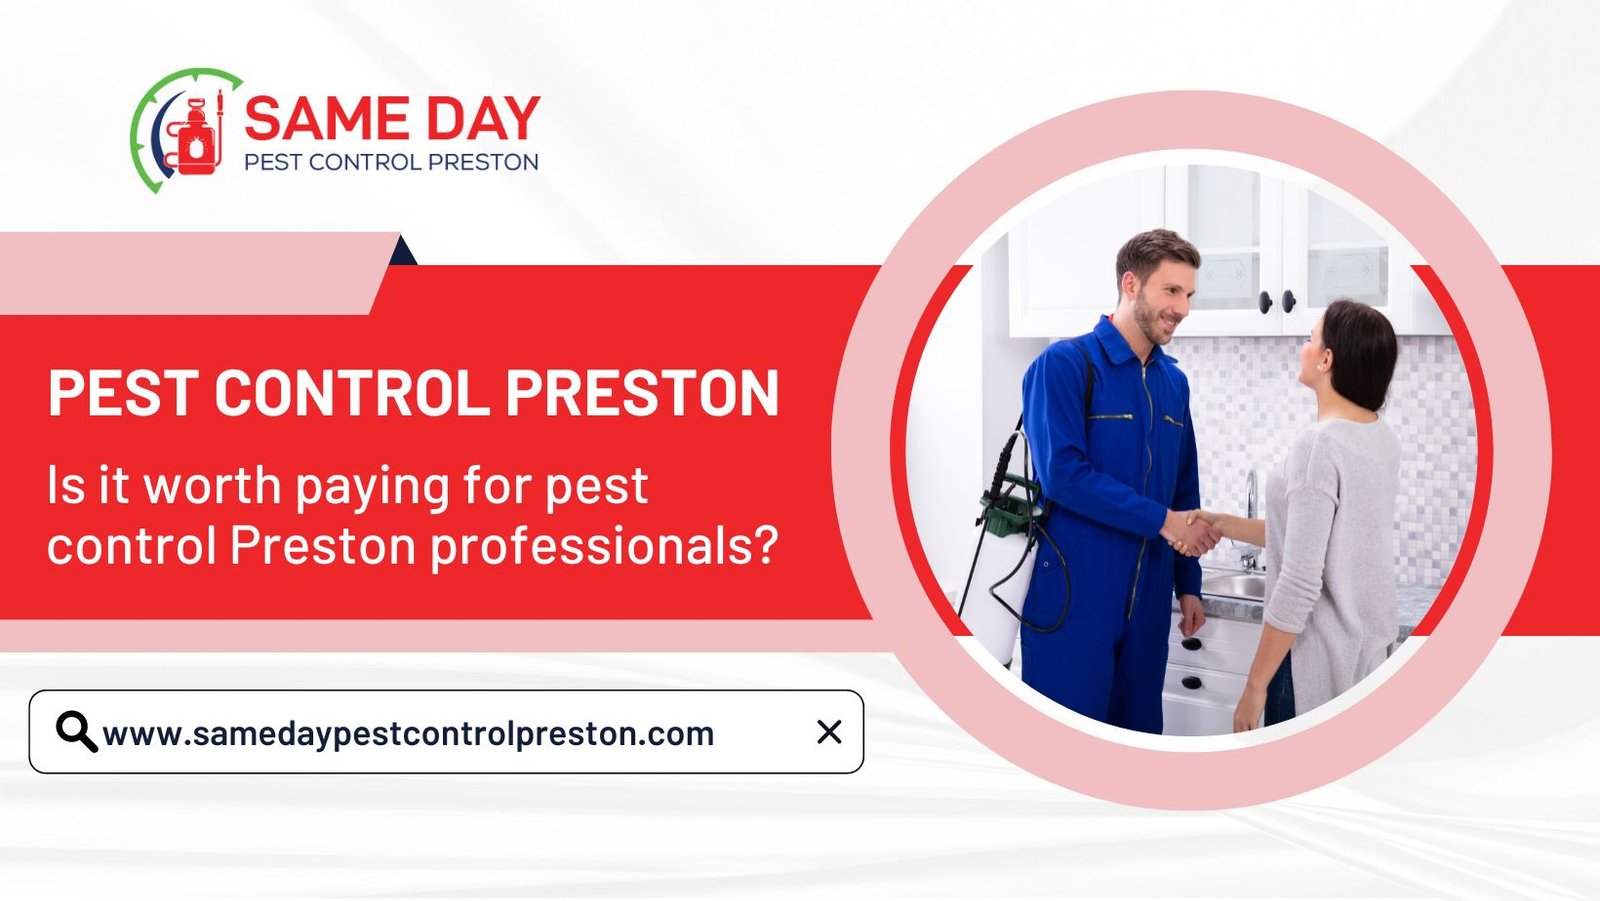 Is it worth paying for pest control Preston professionals?